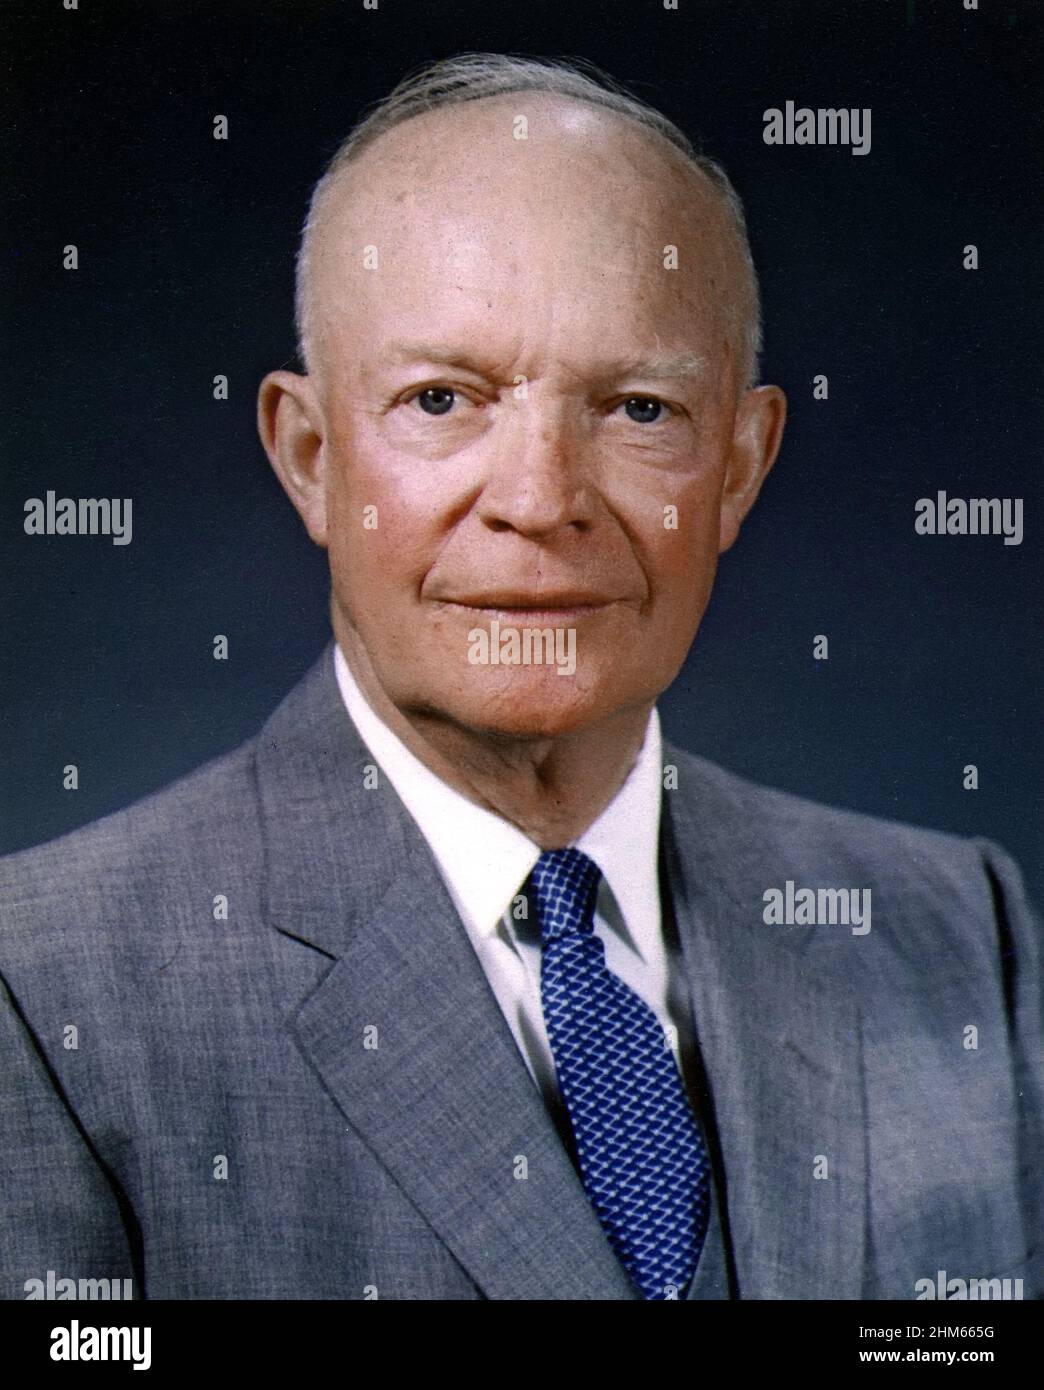 Dwight D. Eisenhower, official photo portrait, May 29, 1959. The 34th president of the United States. Stock Photo